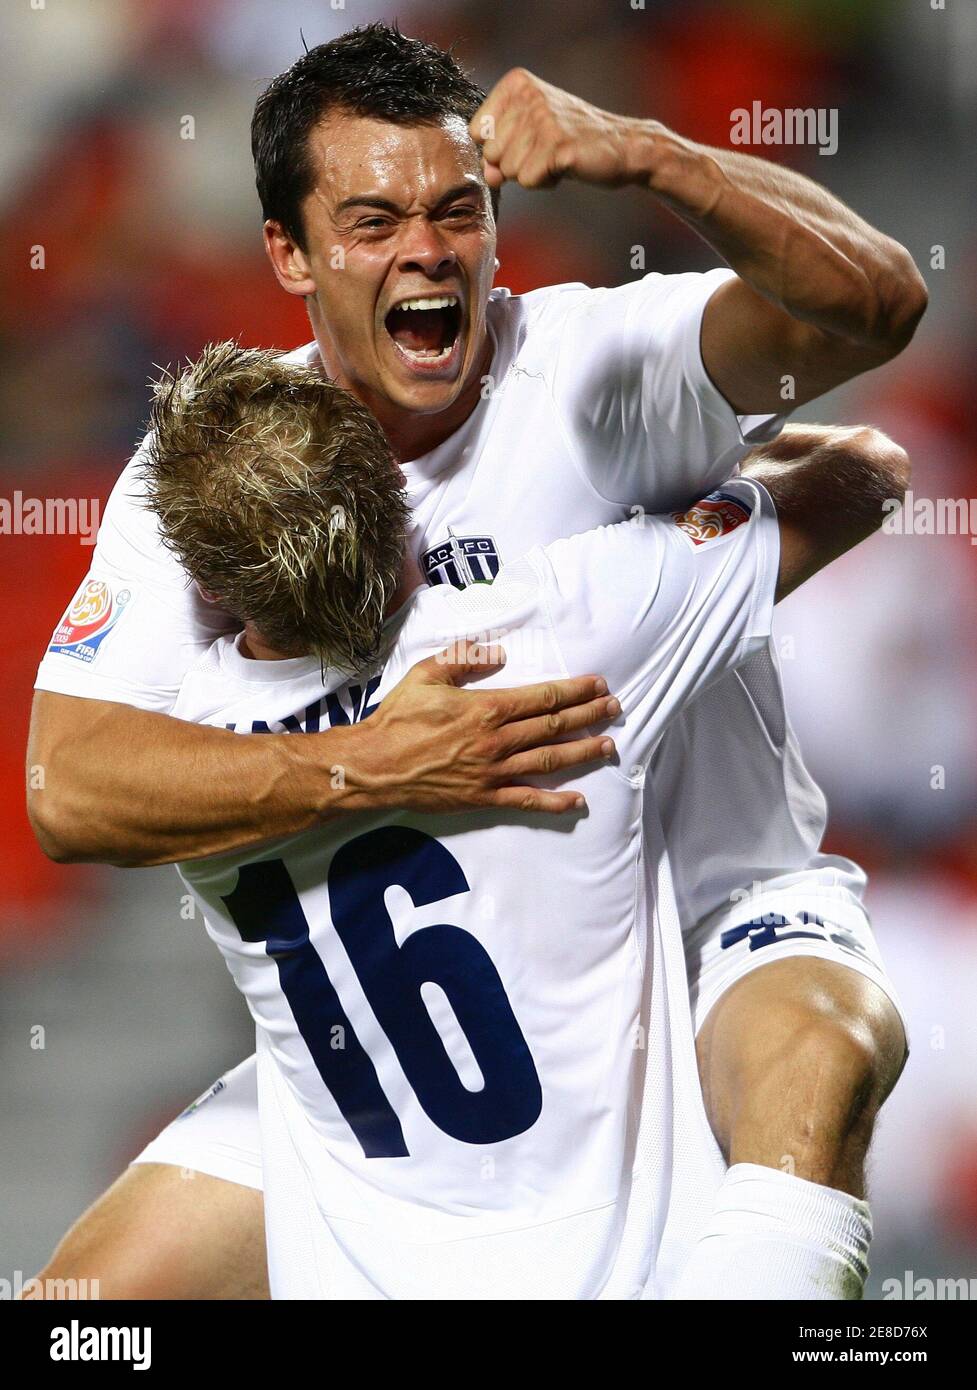 Auckland City's Adam Dickinson (top) celebrates his goal with teammate Jason Hayne during their FIFA Club World Cup soccer match against Al Ahli at Mohammad Bin Zayed stadium in Abu Dhabi December 9, 2009.  REUTERS/Fahad Shadeed (UNITED ARAB EMIRATES SPORT SOCCER) Stock Photo